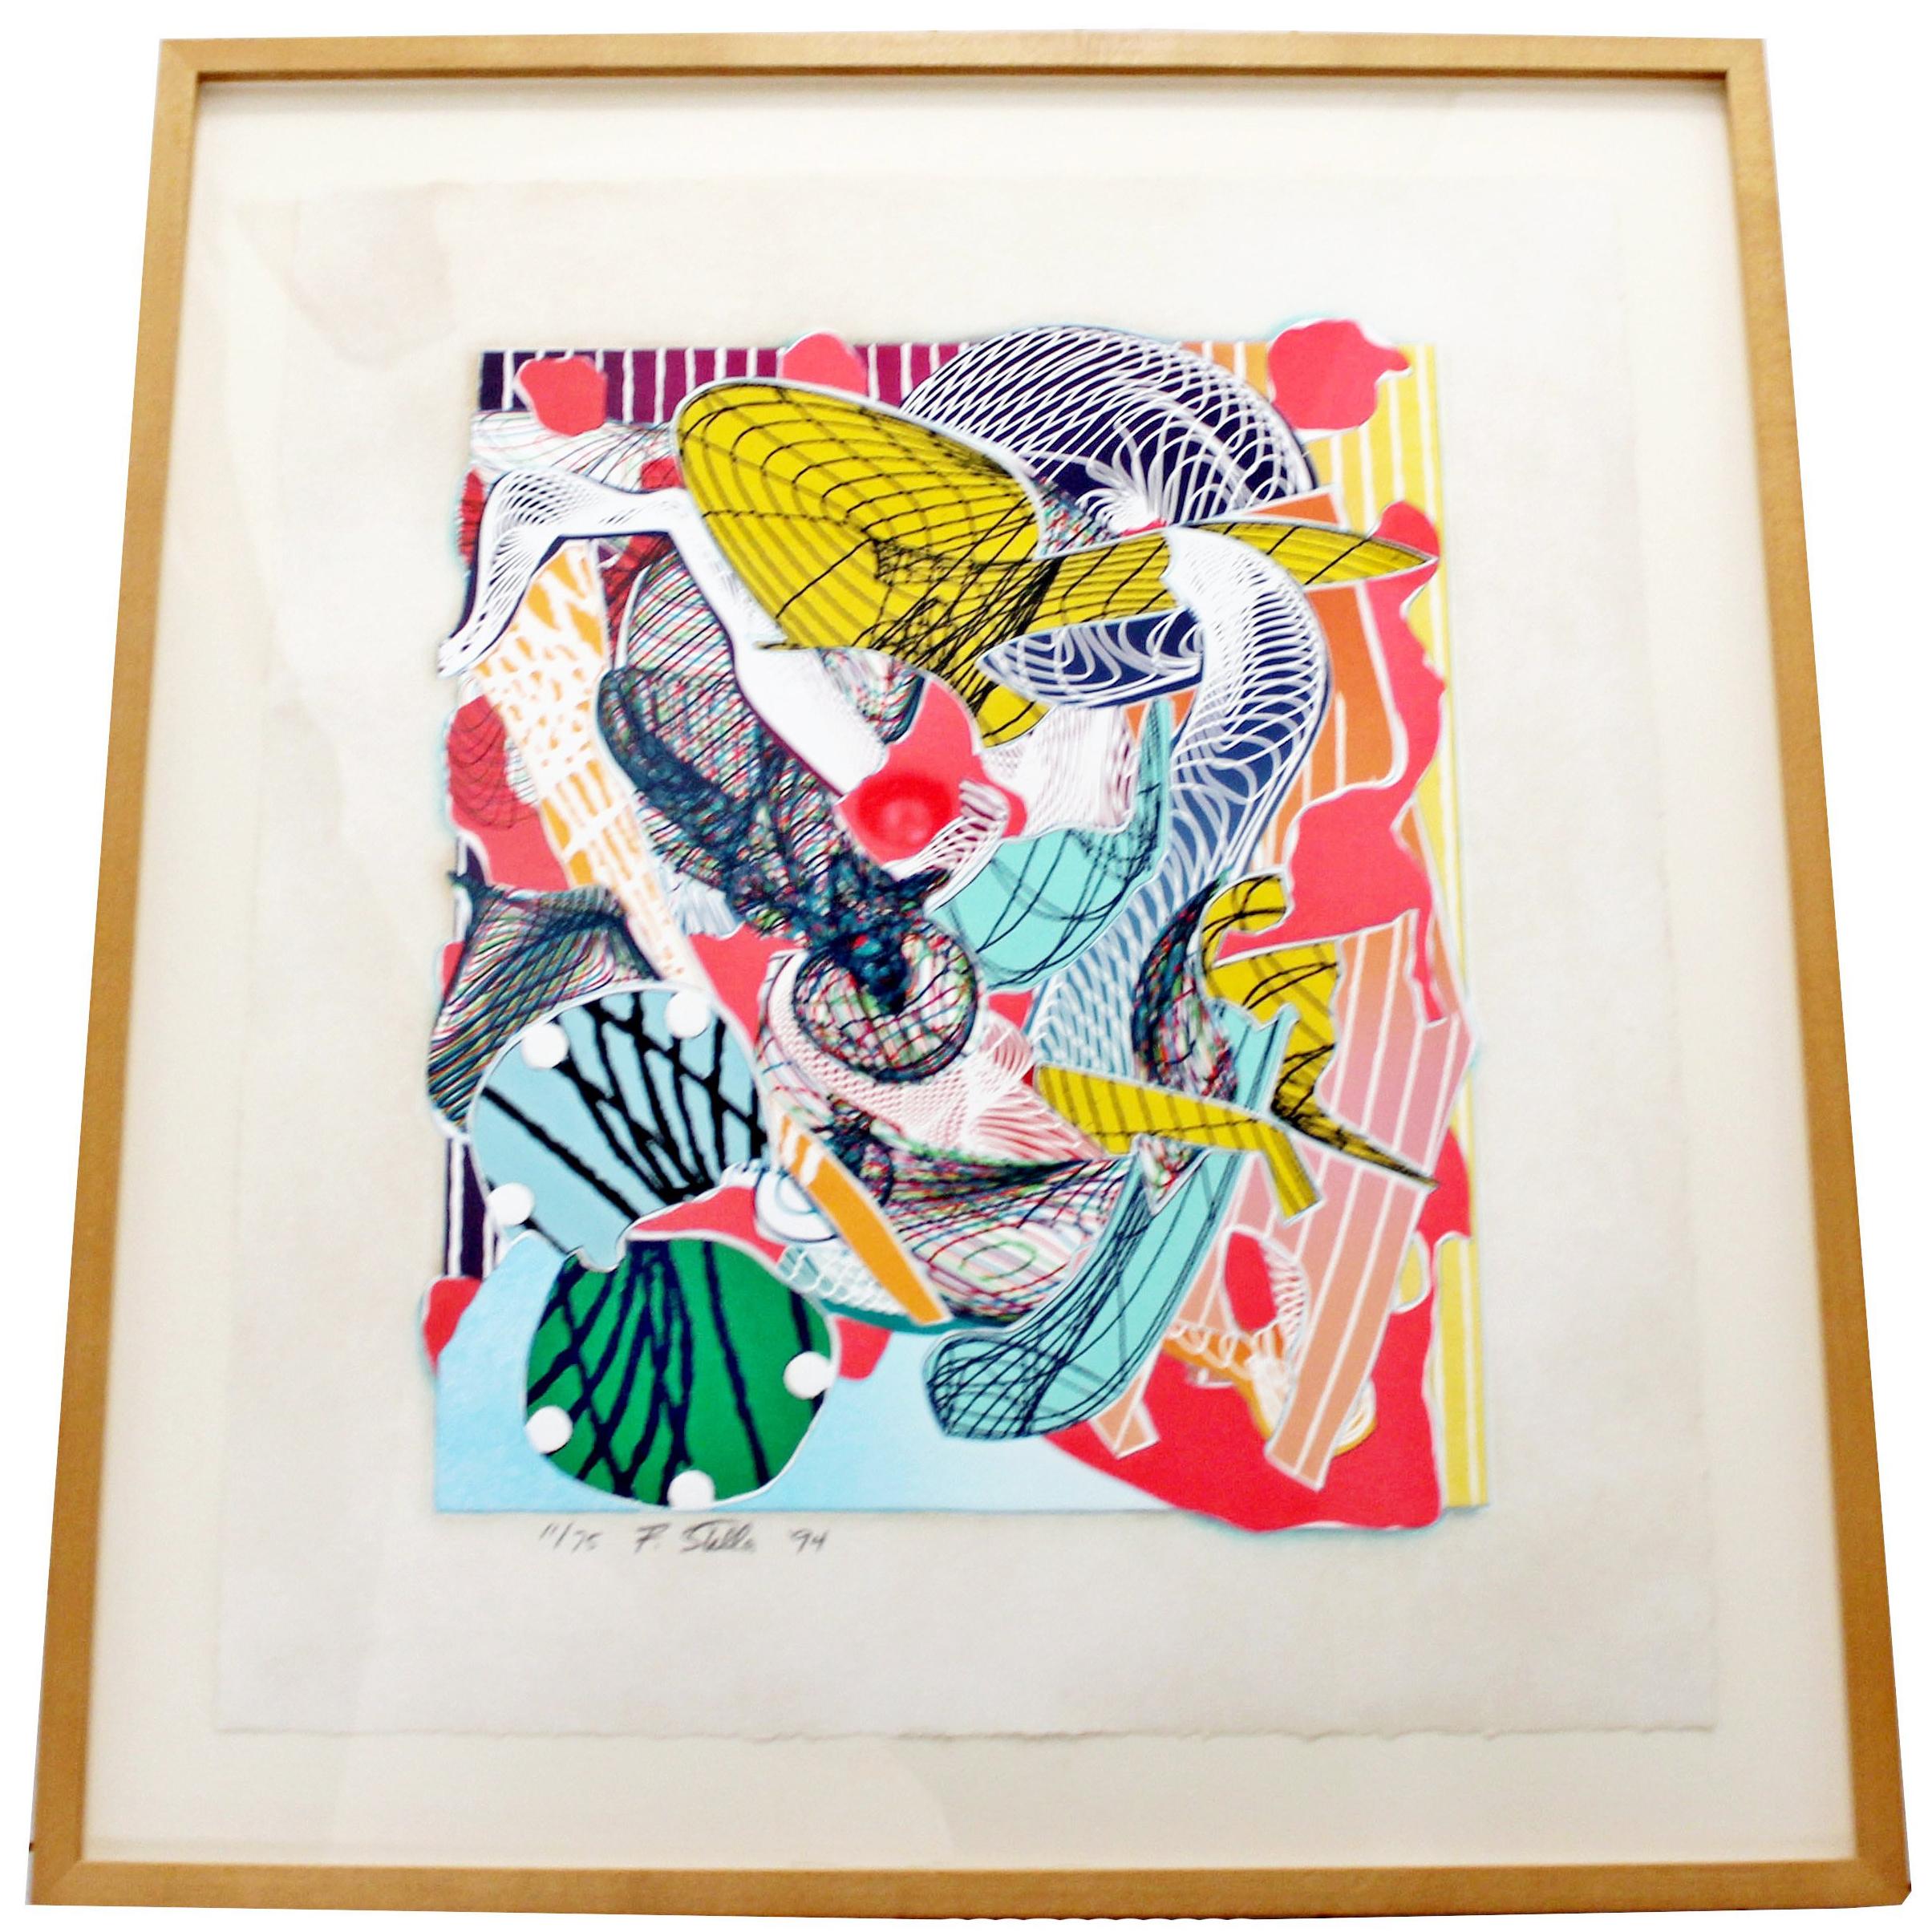 Limanora Silkscreen Framed and Signed by Frank Stella Dated 1994